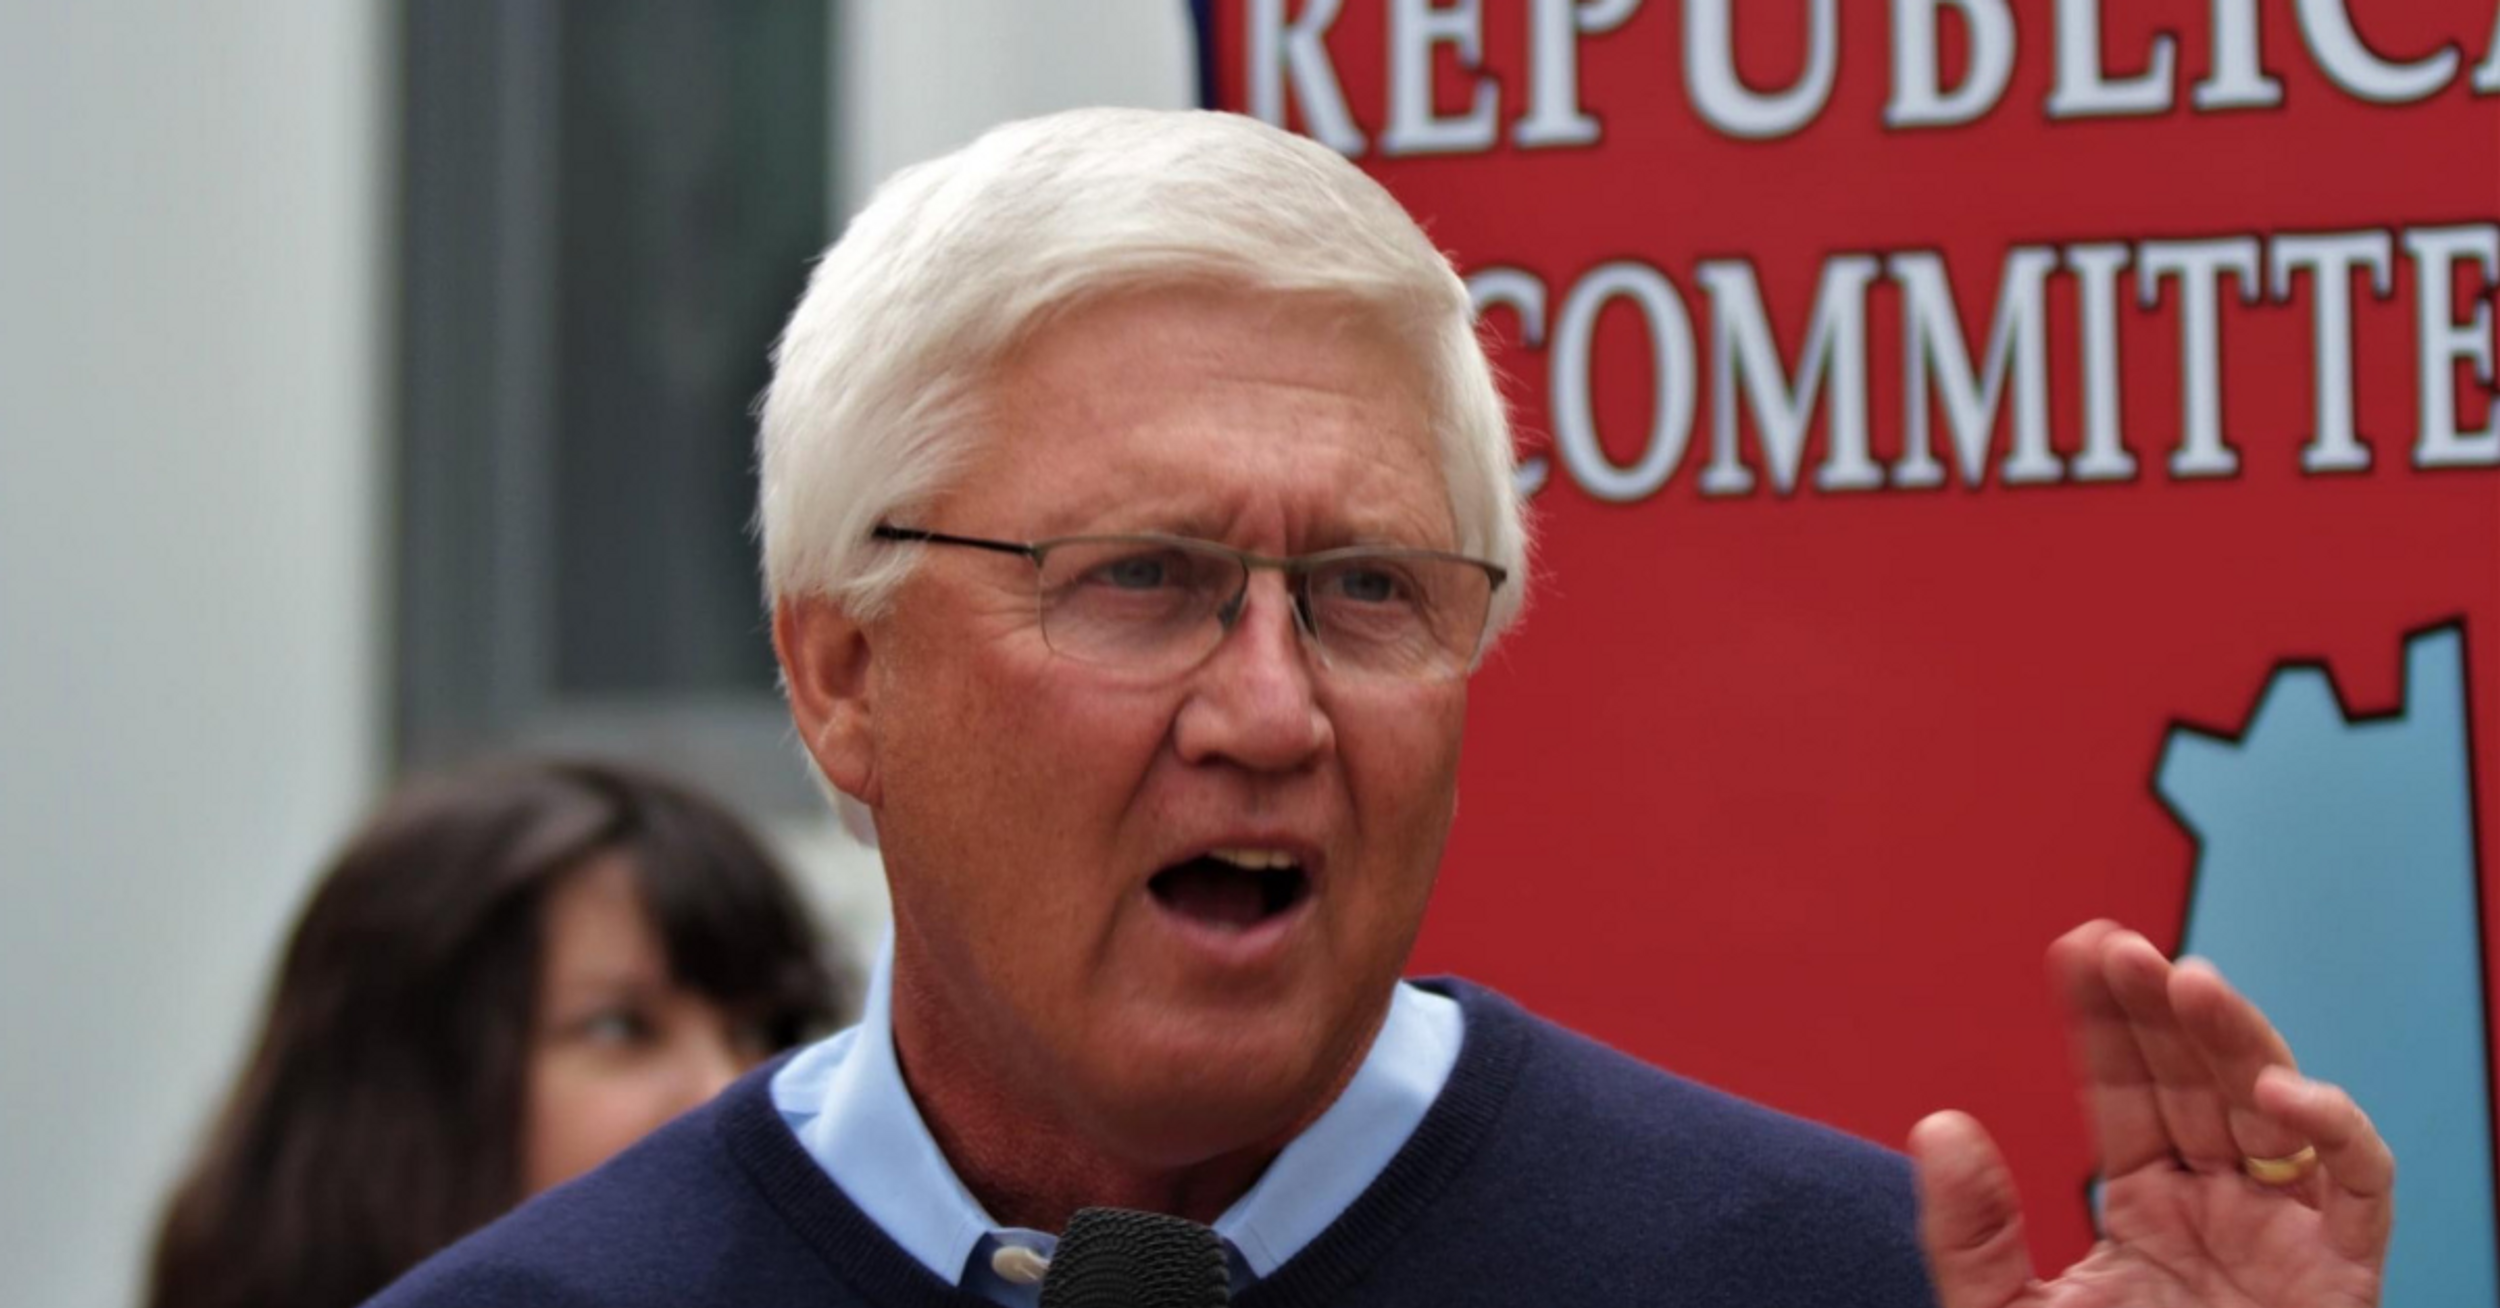 GOP Candidate Claims He's Done 'More For Climate Change Than Anyone' Because He Owns A Garden Center